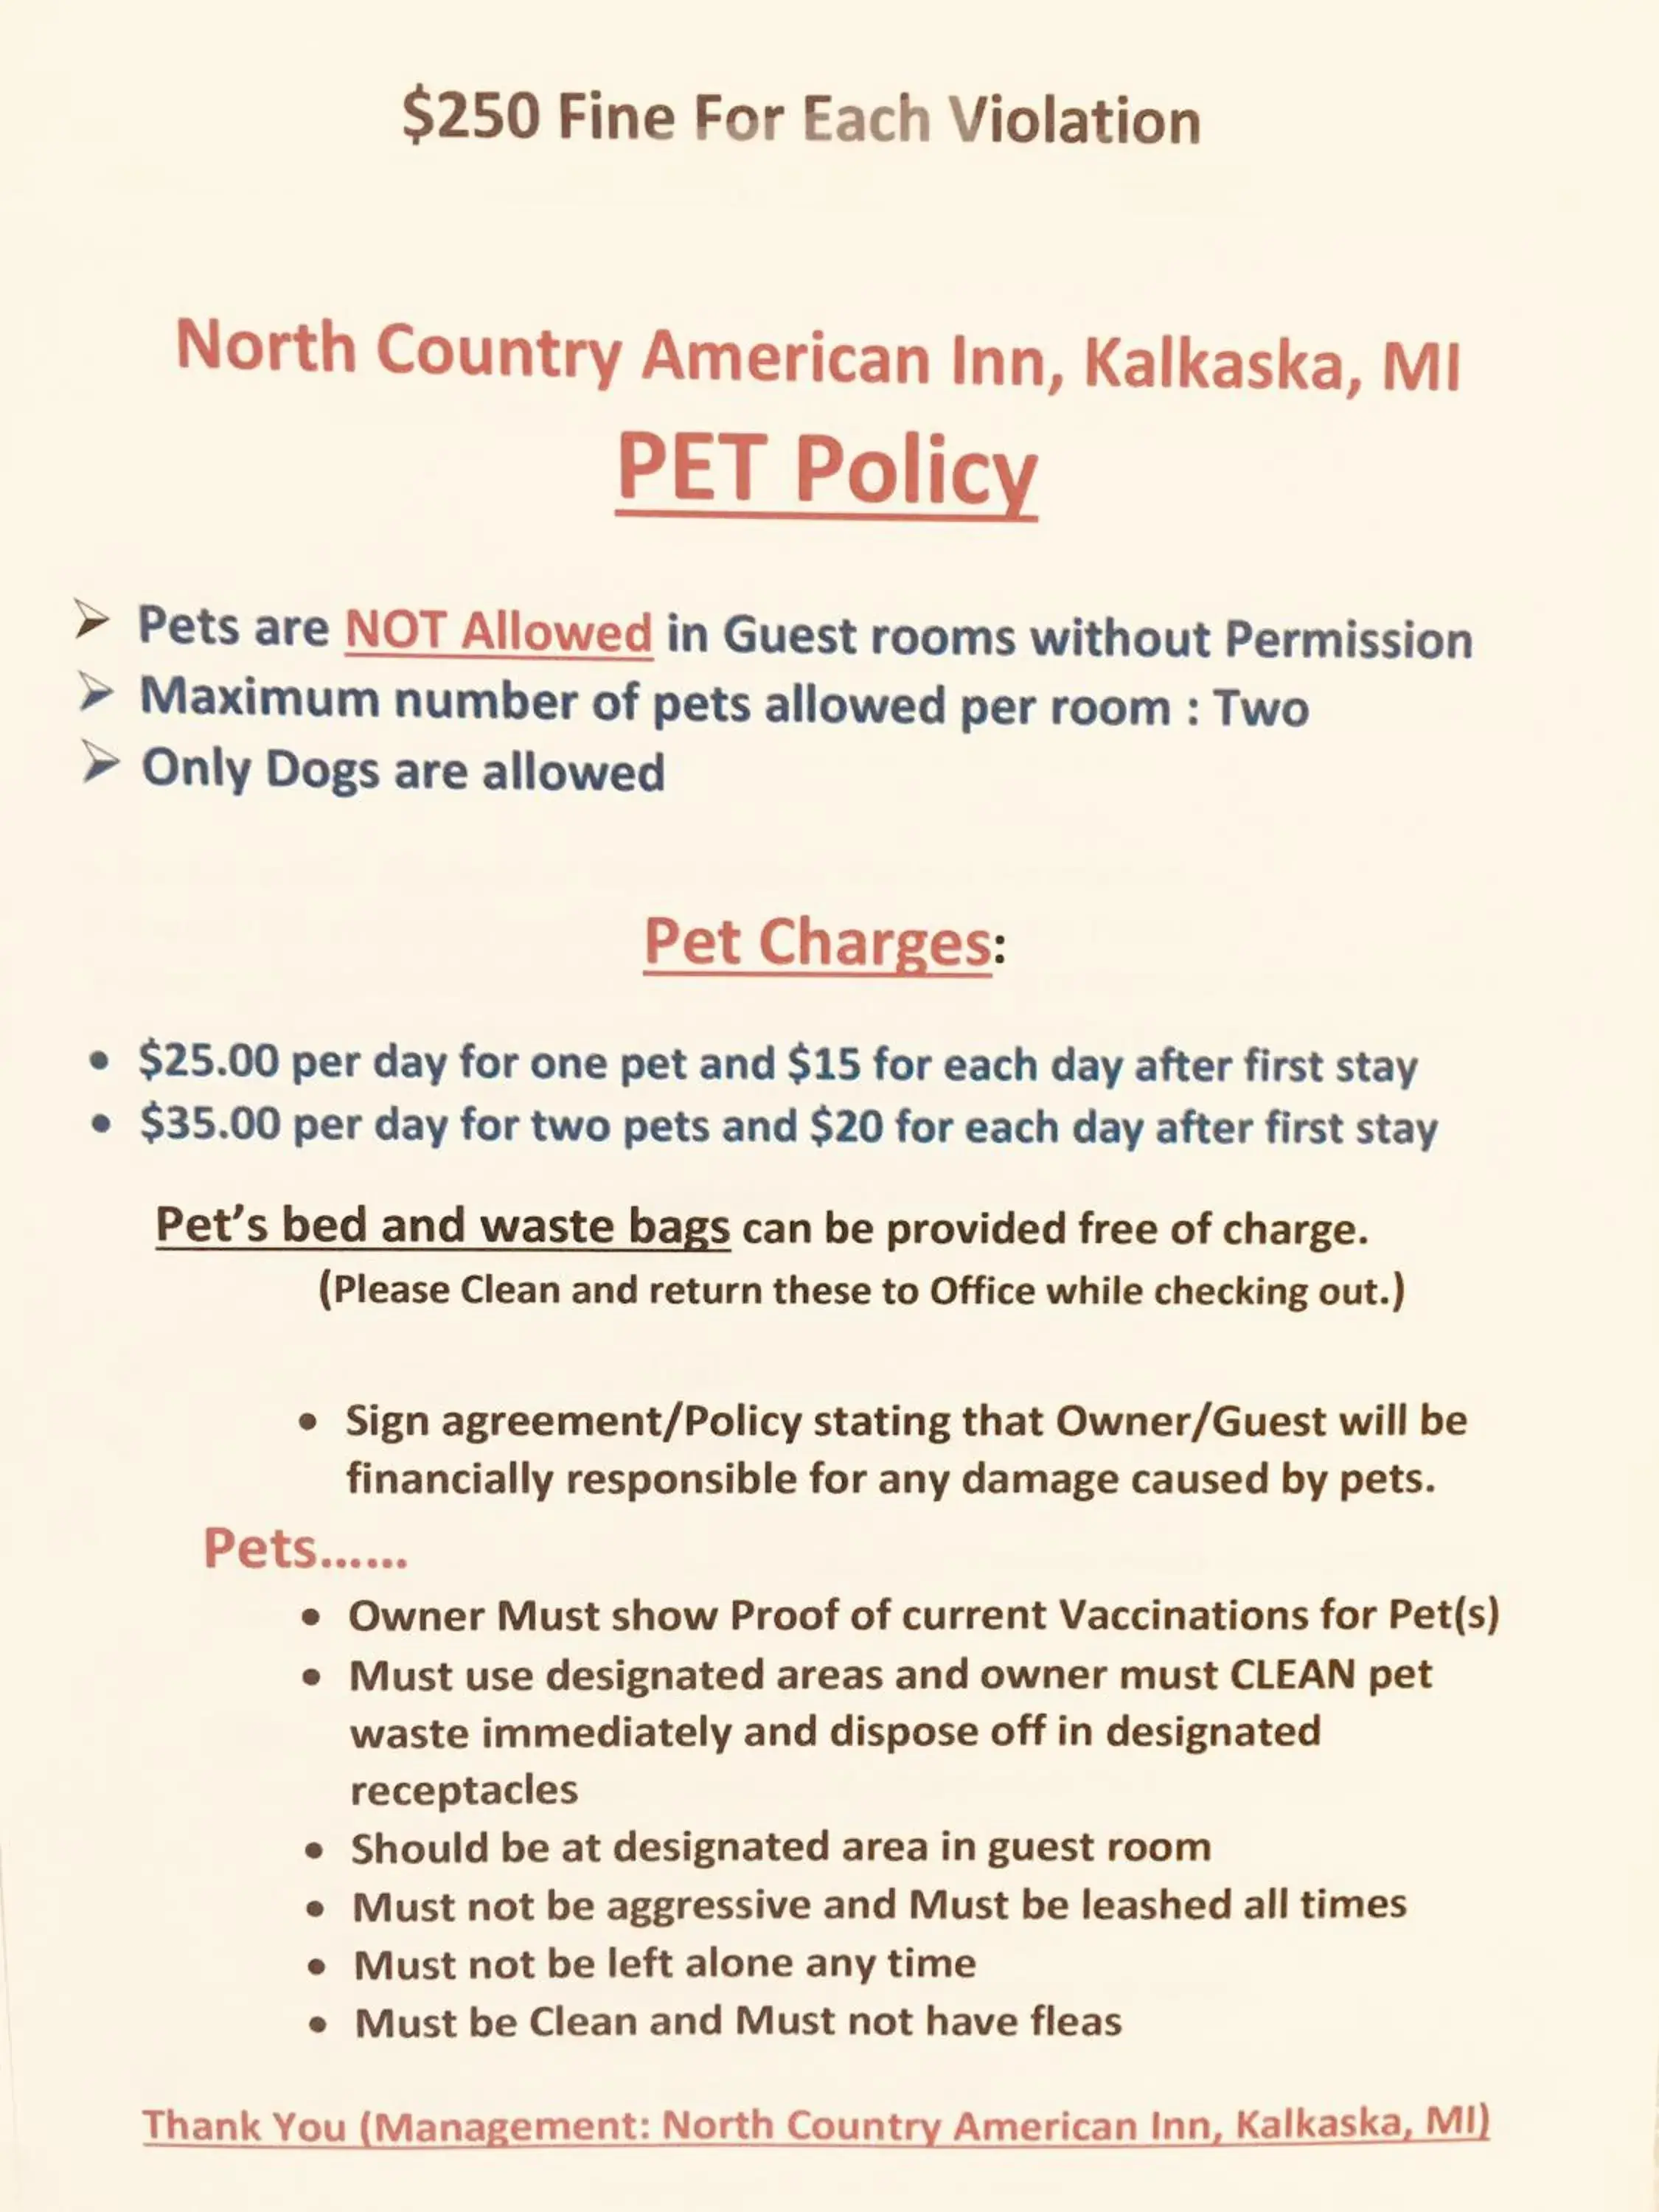 Pets in North Country American Inn